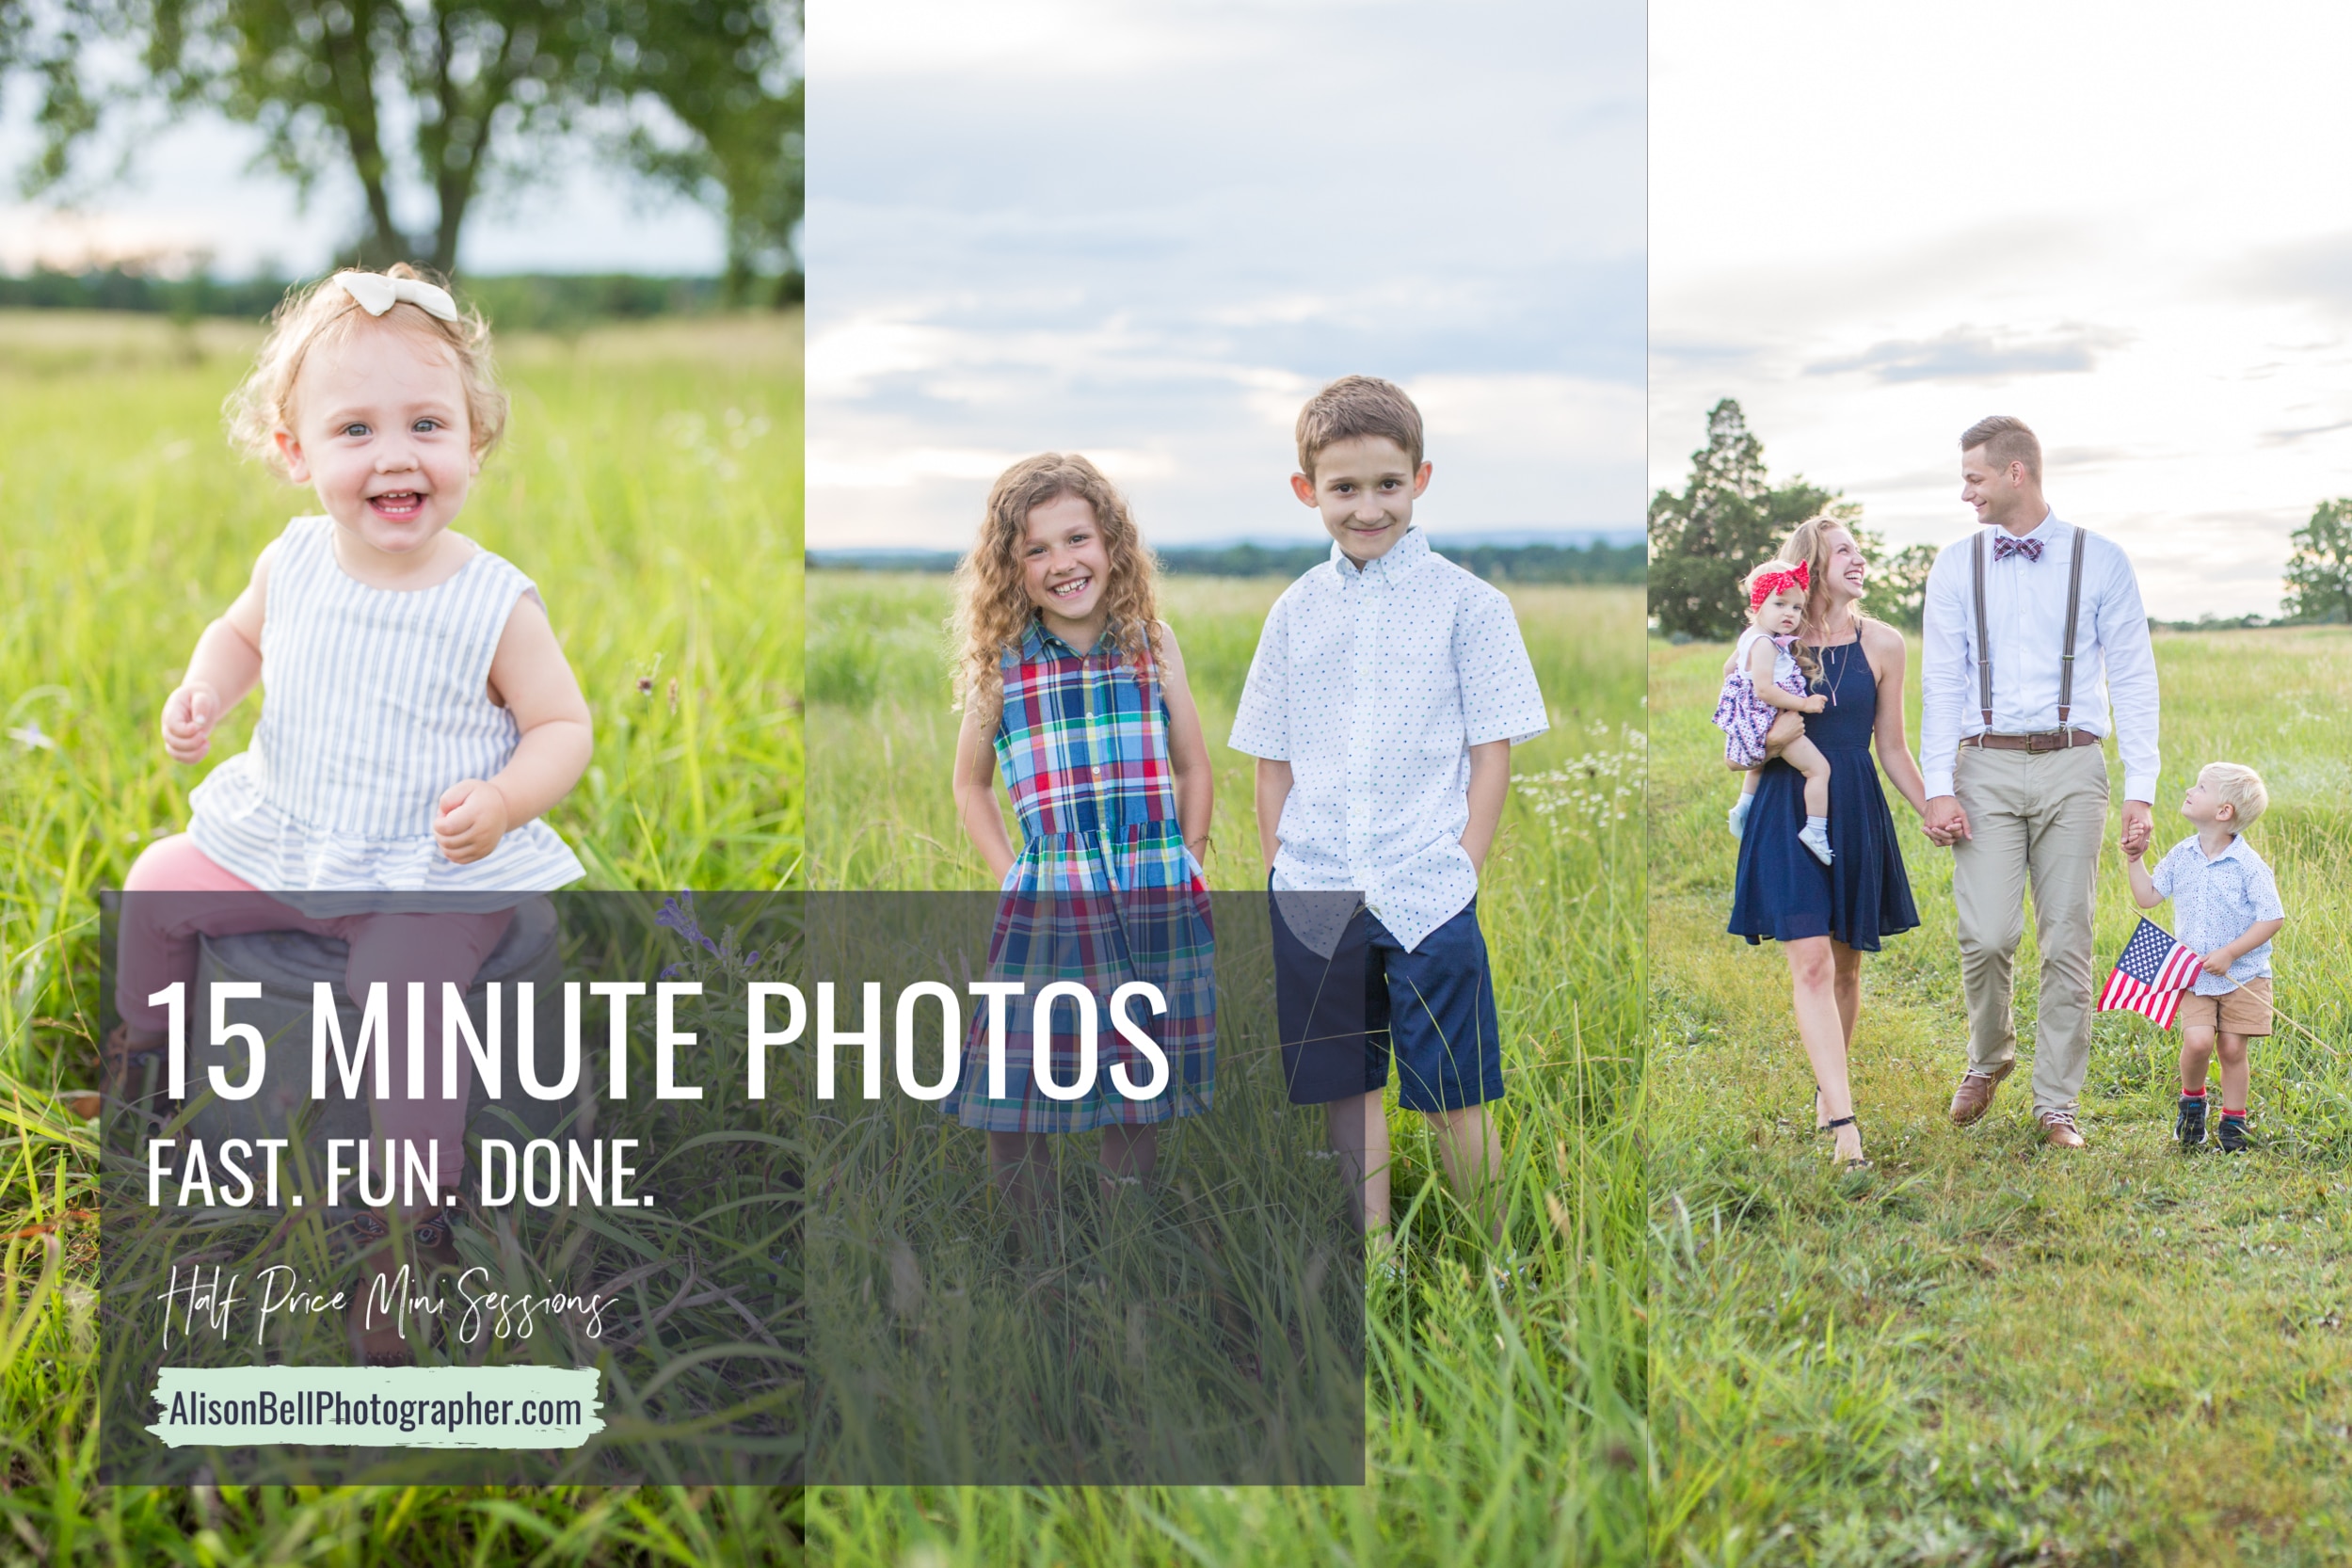 Half Price family mini photo session by alison bell, photographer.